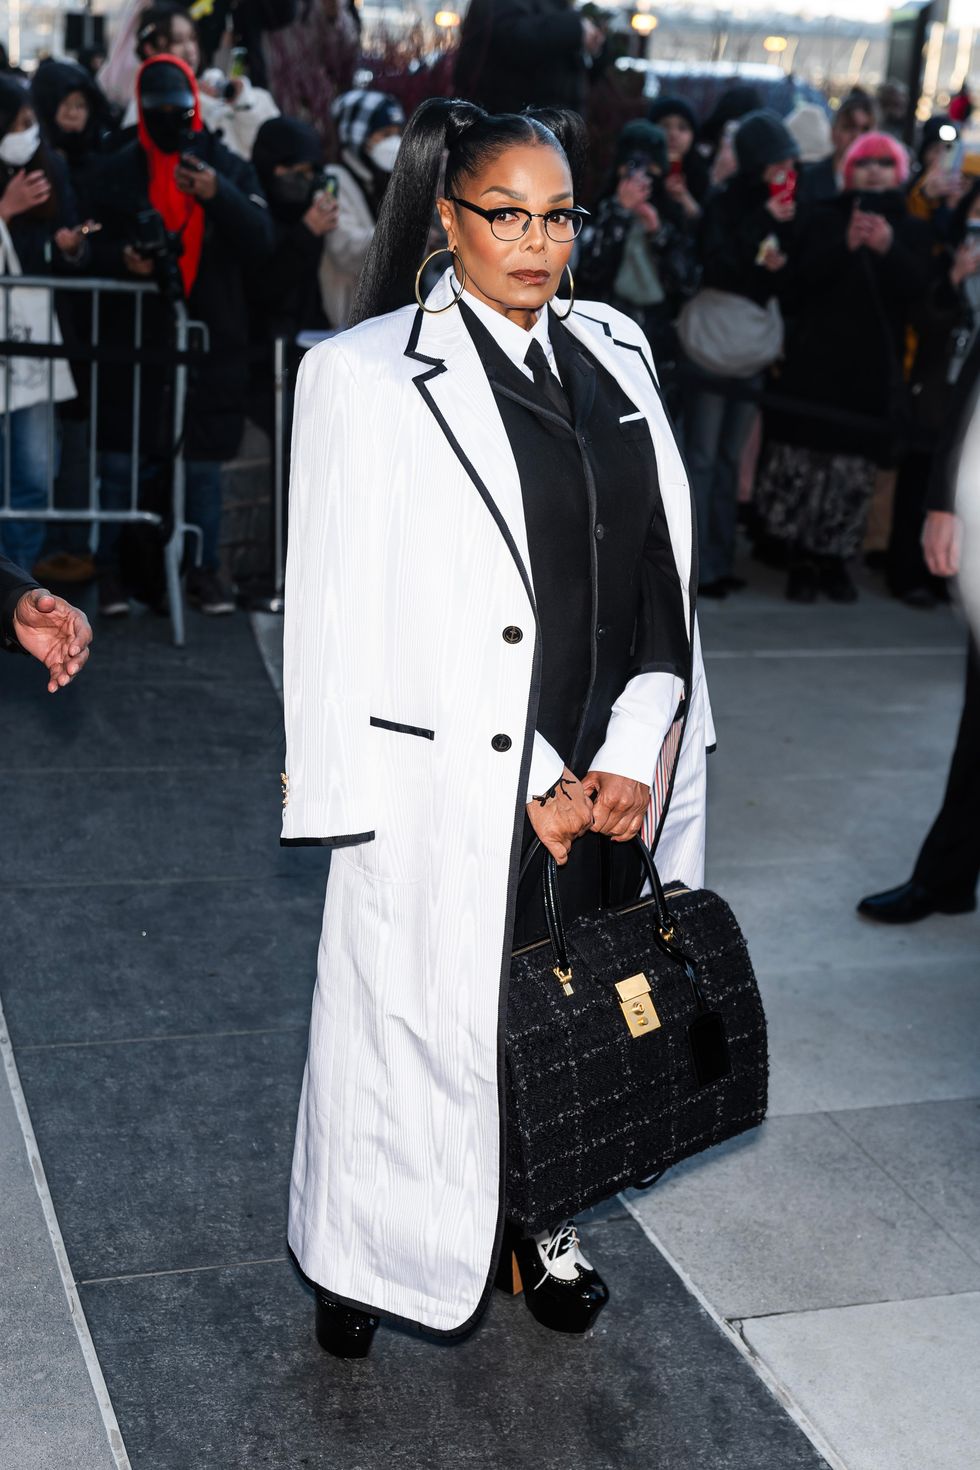 a black woman wearing a white oversized coat, glasses and a suit